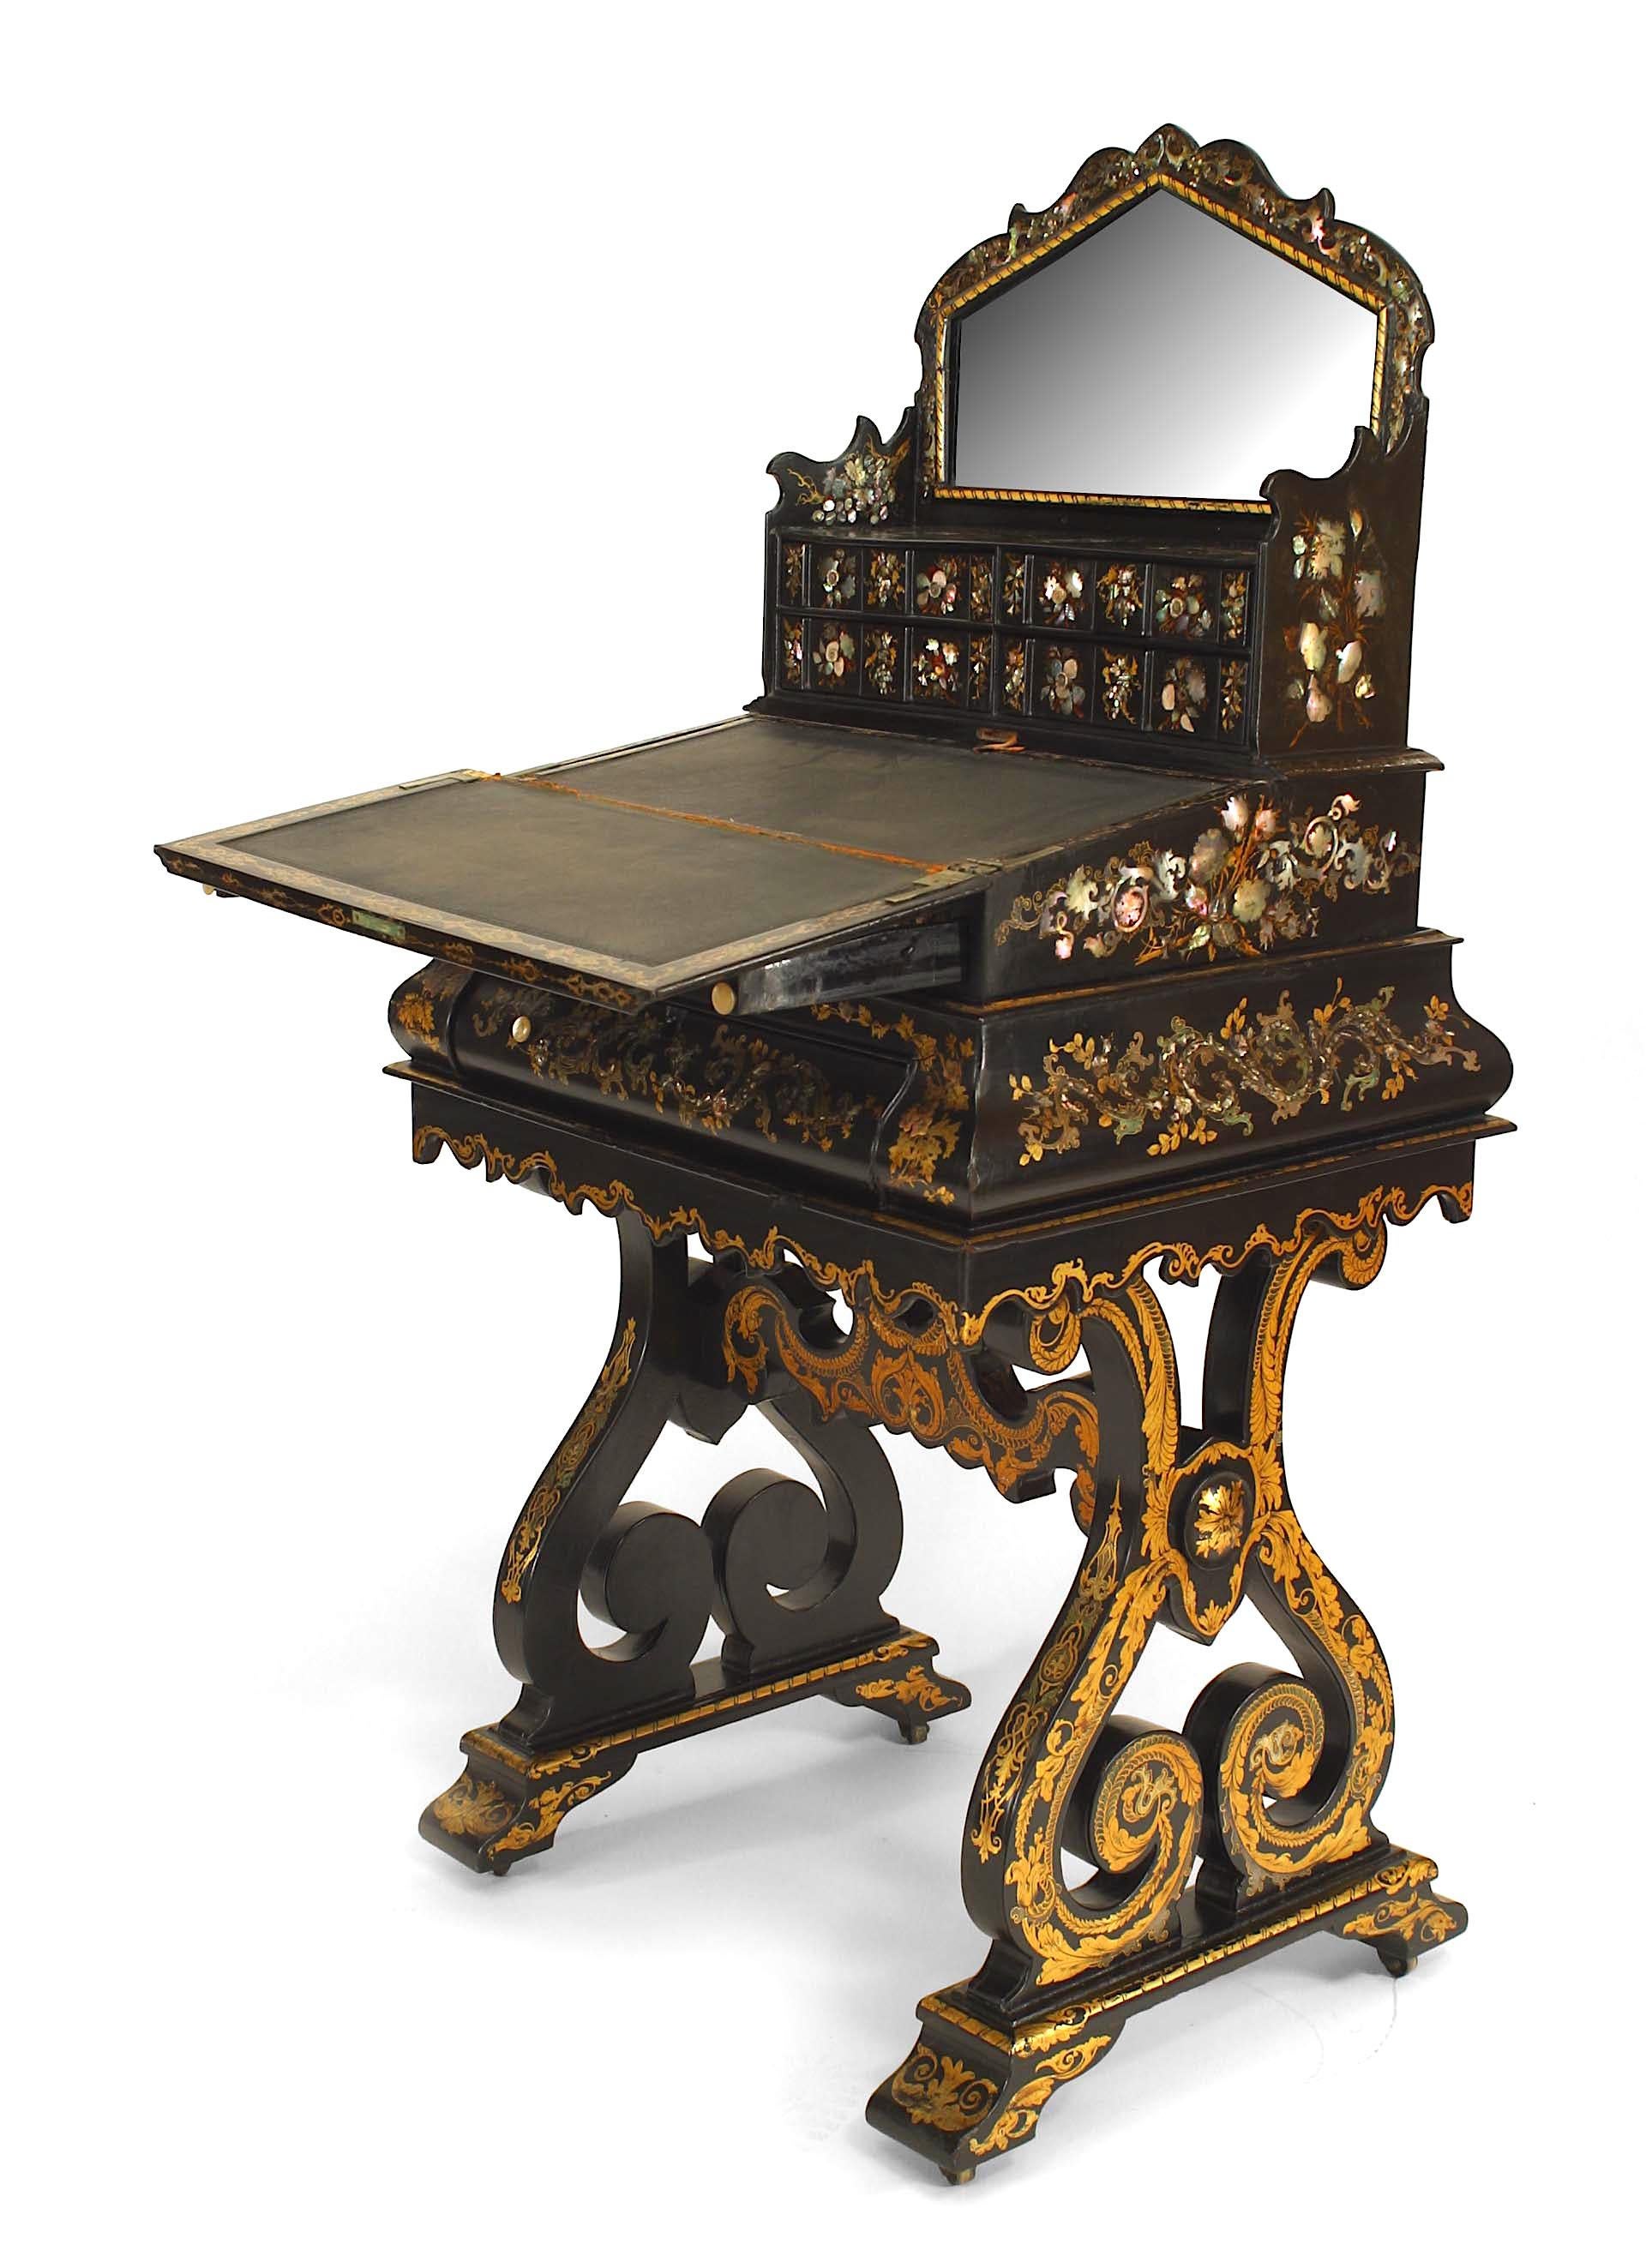 English Victorian papier mache pearl inlaid black lacquered writing/sewing table with game table base and stretcher. (2 sections/removable upper section)
